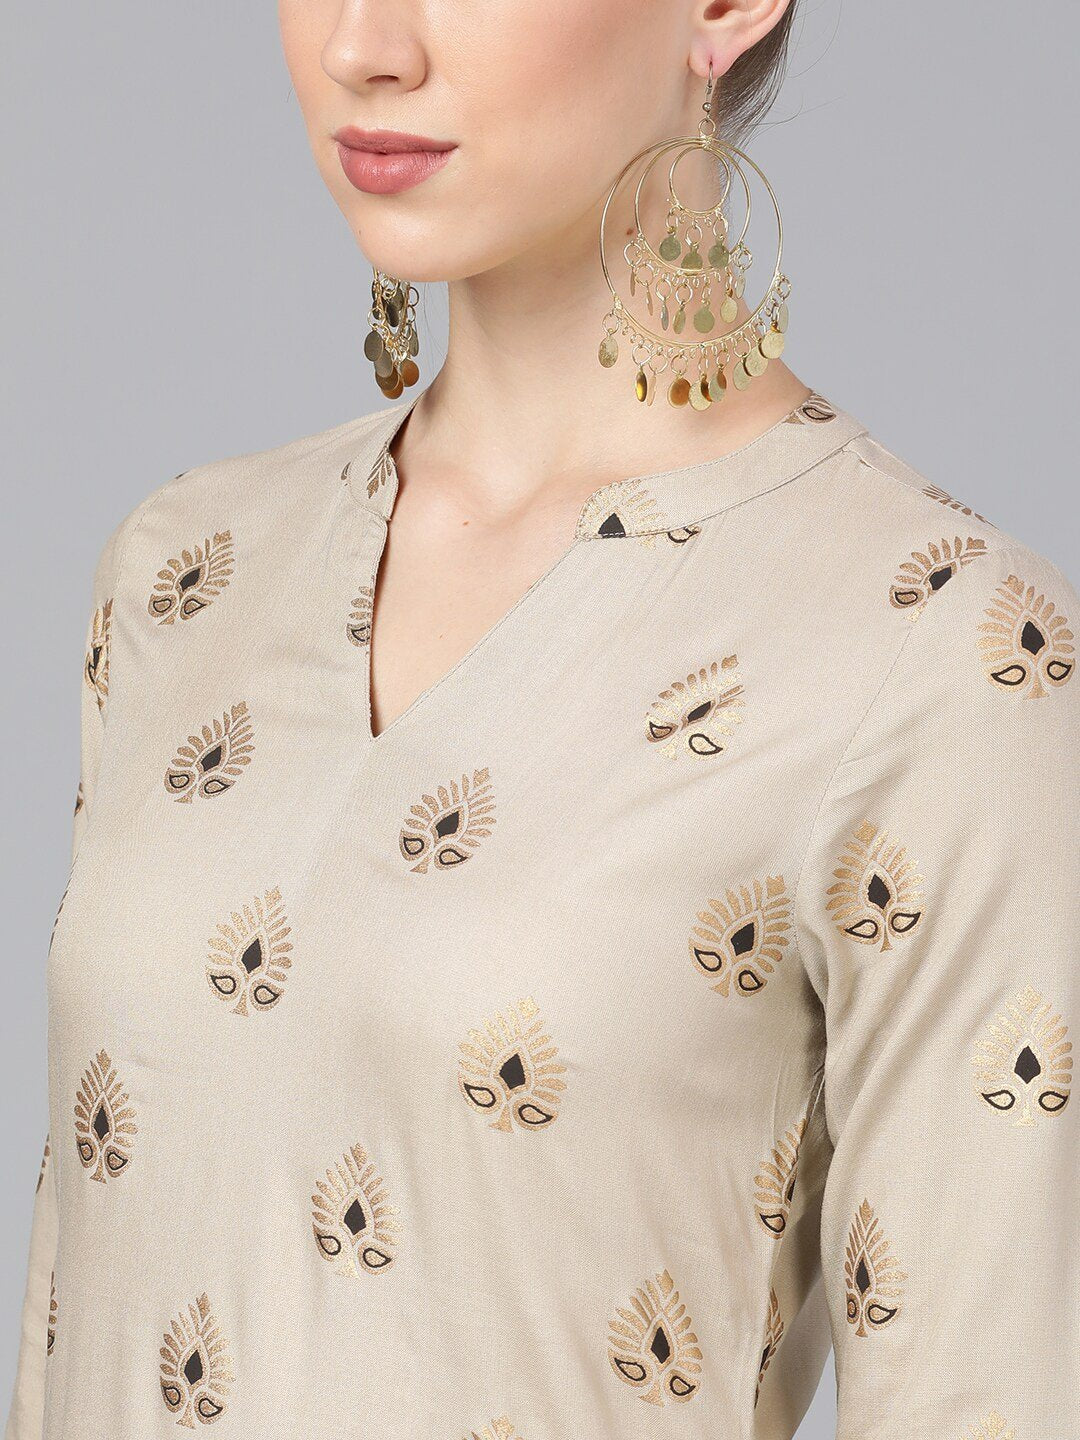 Women's  Nude-Coloured & Brown Foil Printed Kurta with Palazzos - AKS